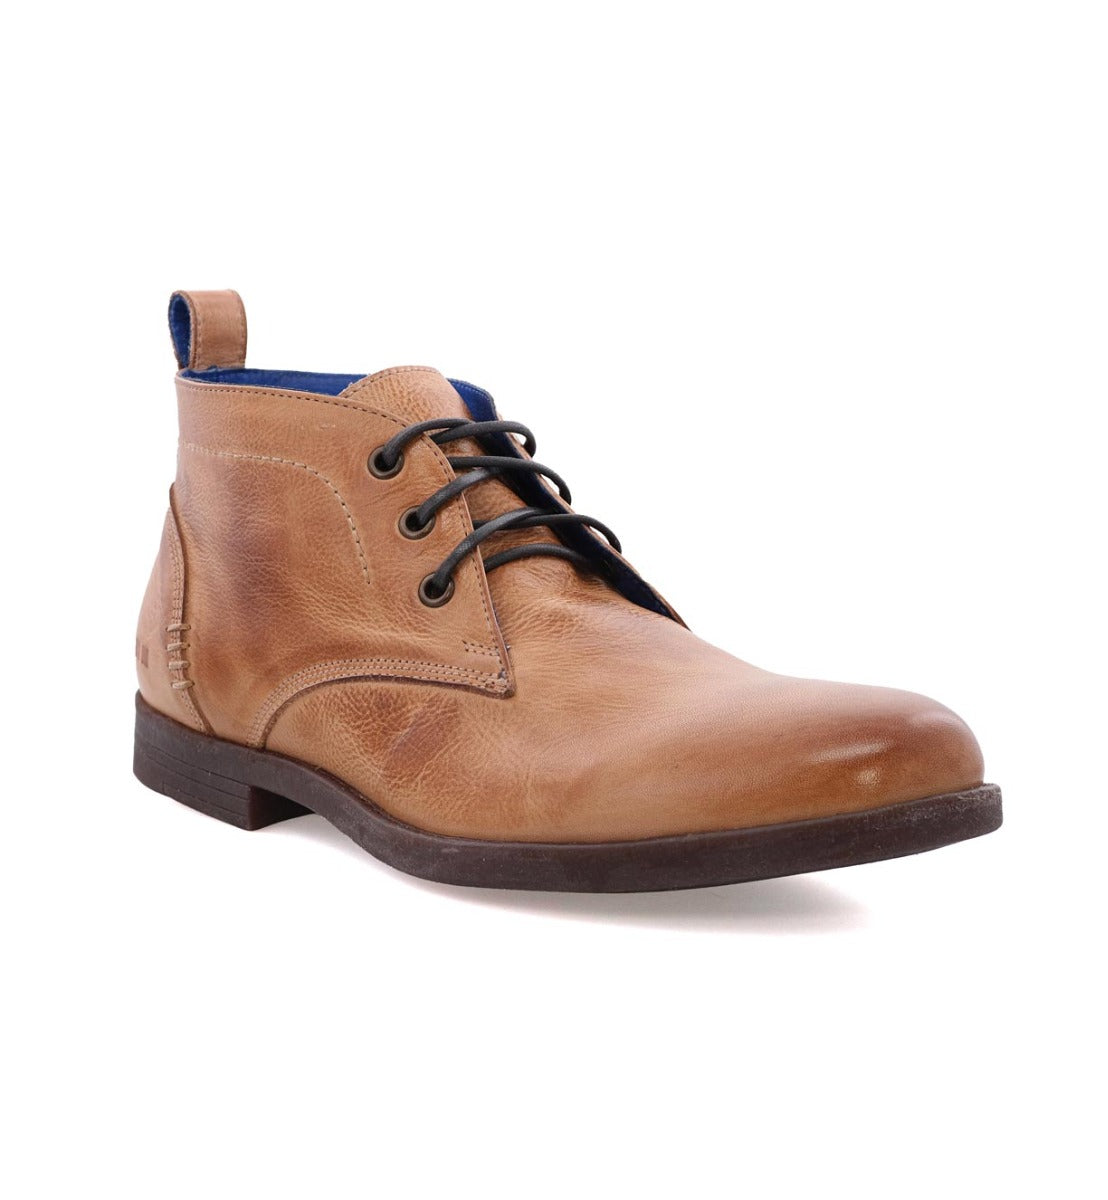 A single Illiad Teak Rustic Boot by Bed Stu with black laces on a white background.